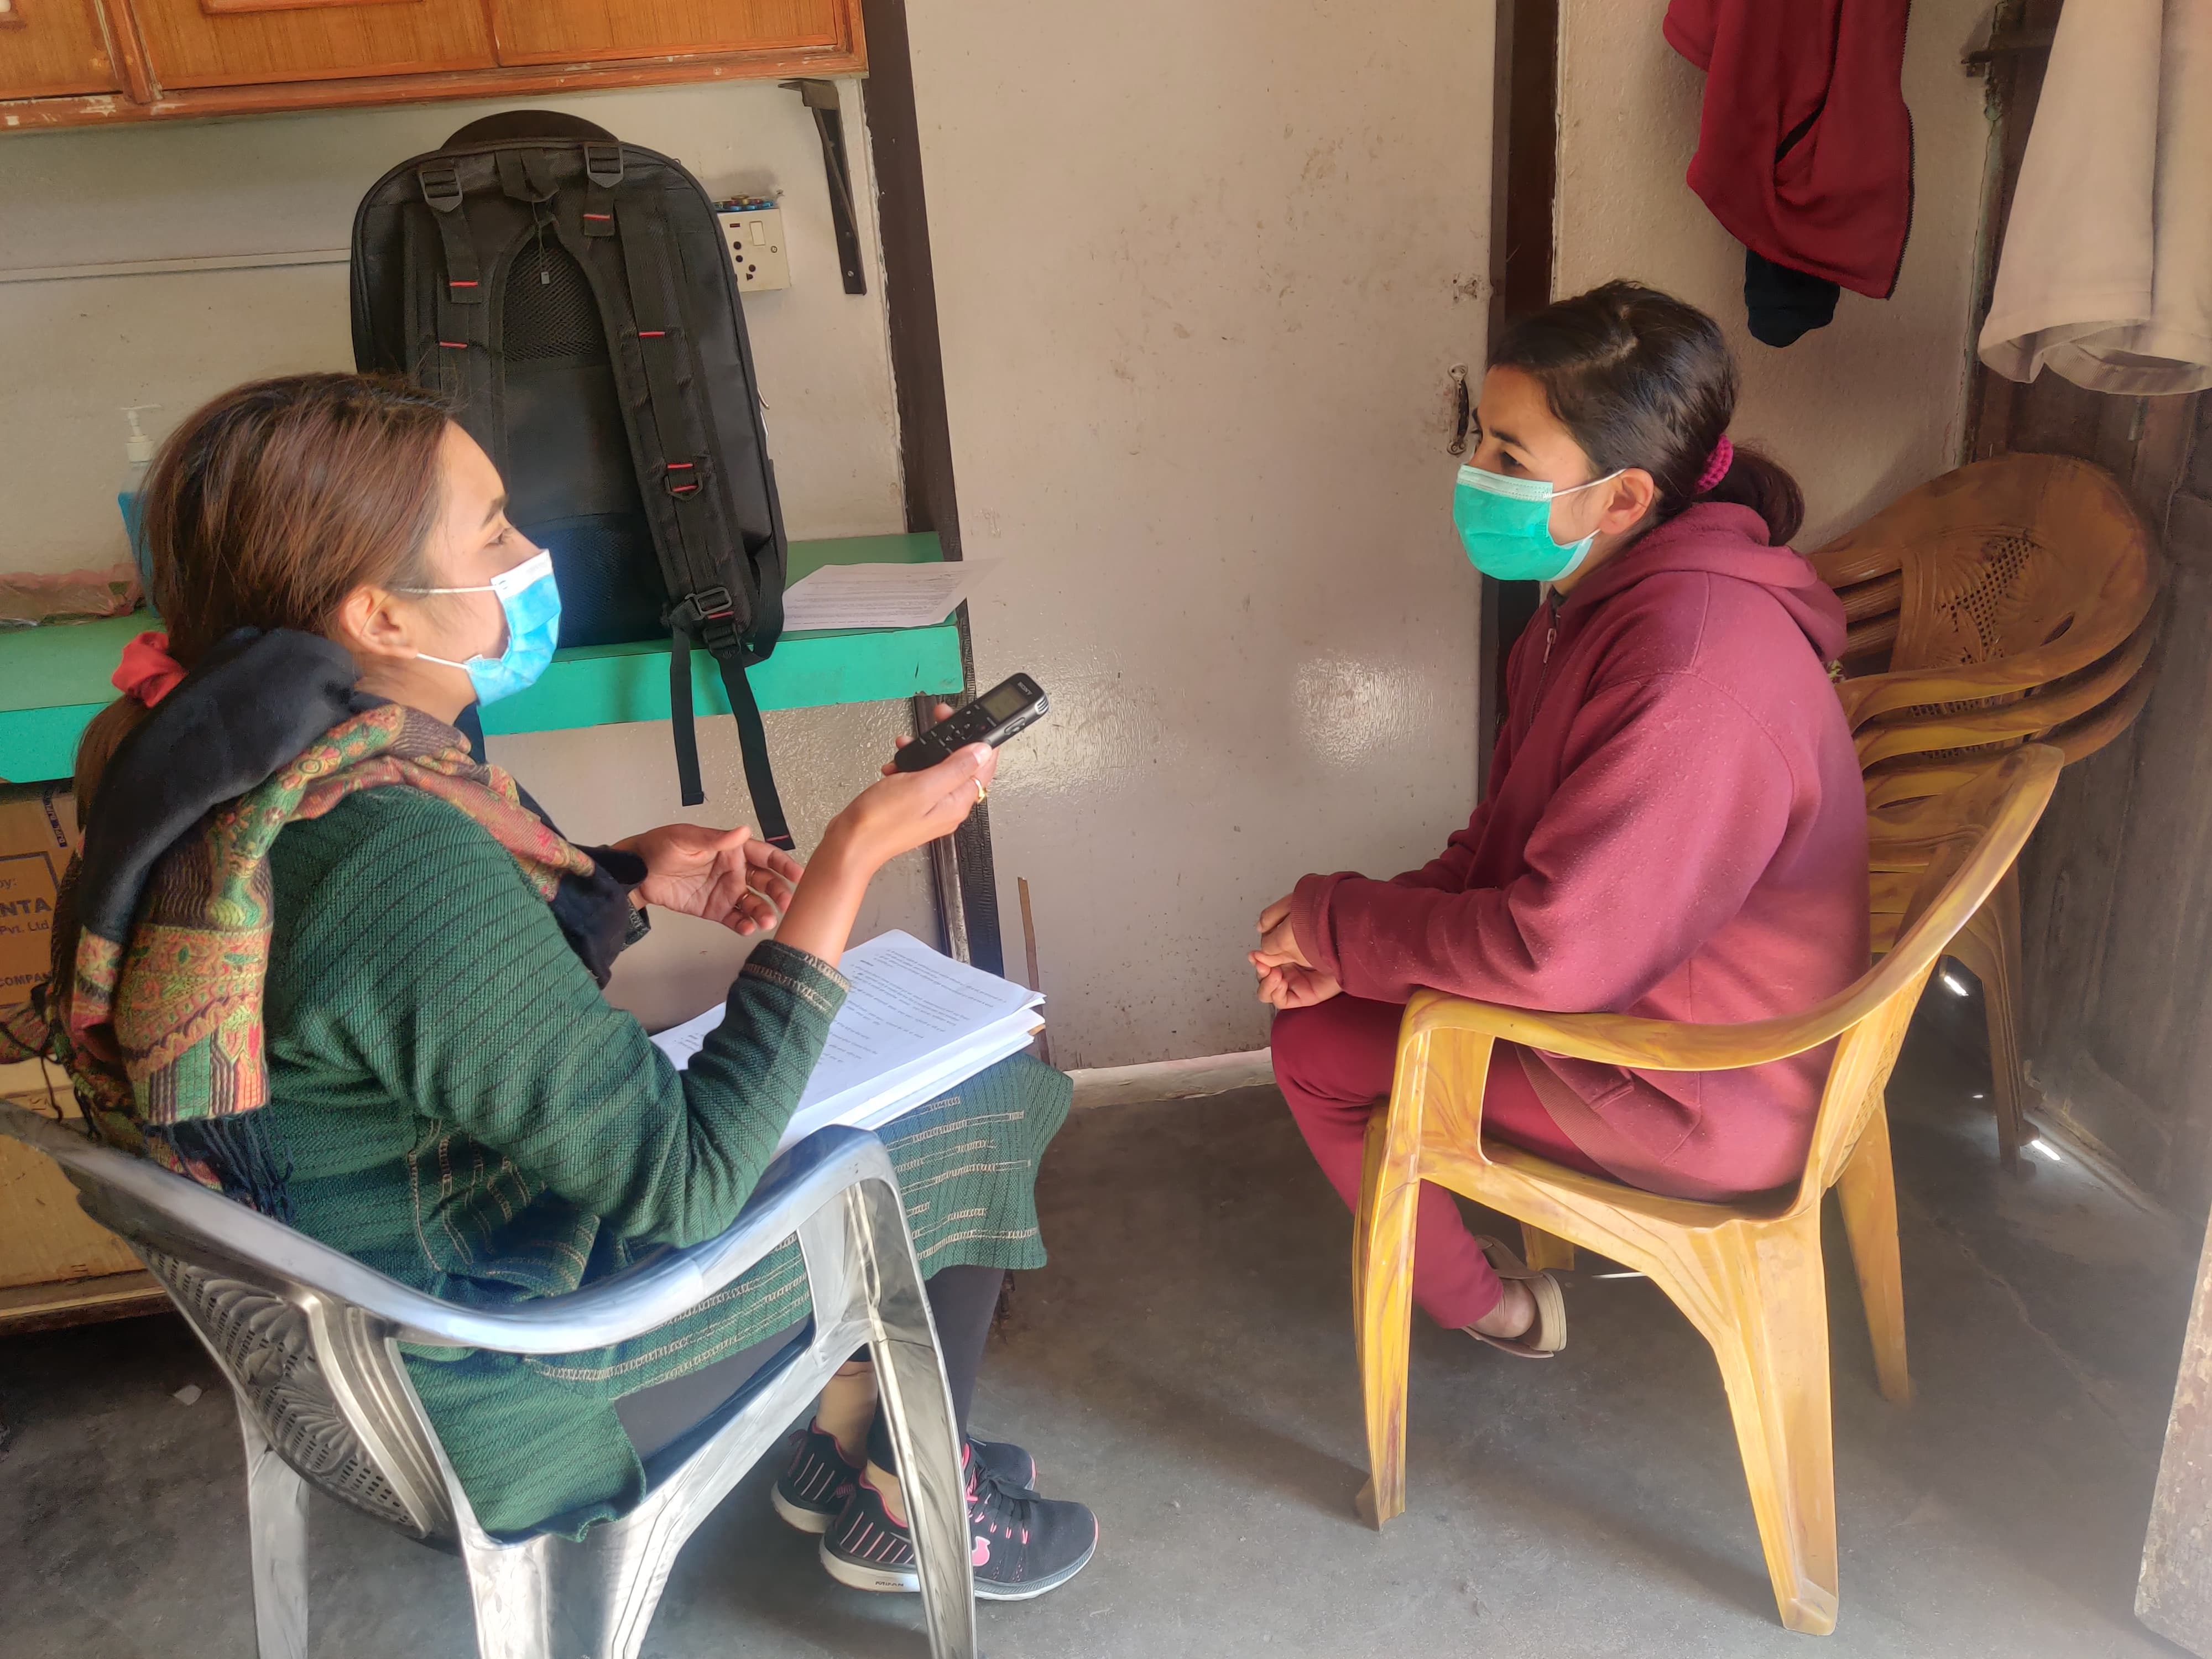 A researcher interviews a private health provider with the Sangini franchising network to gain insight into why the use of CRS contraceptive brands decreased between 2018 and 2020.